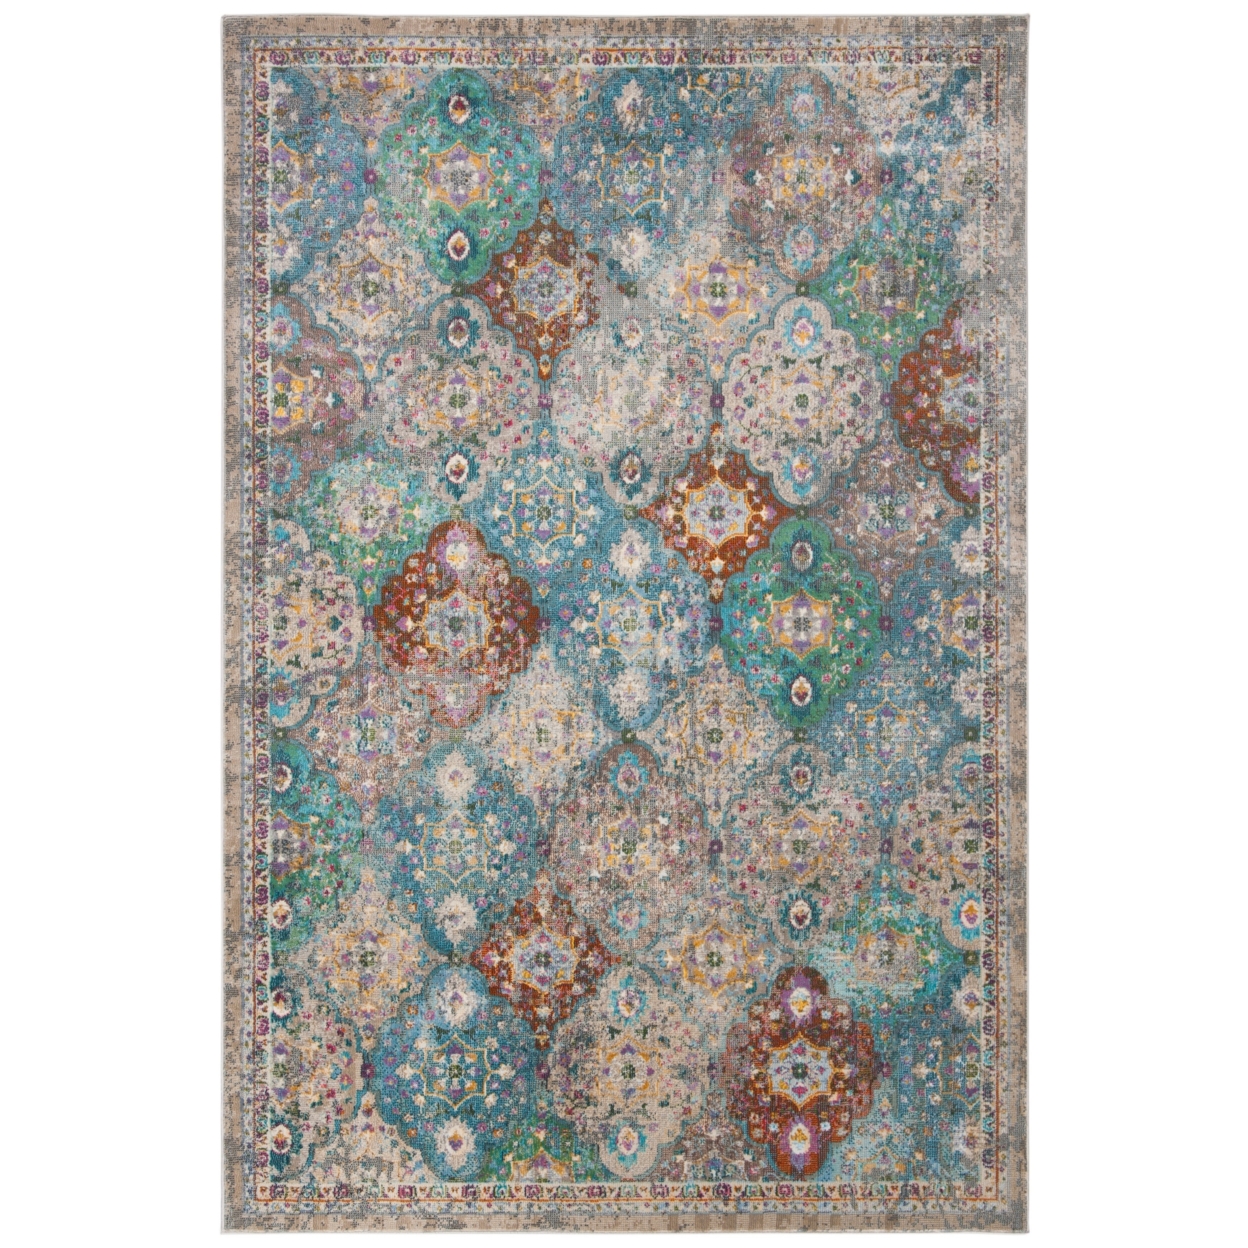 SAFAVIEH Luxor Collection LUX329A Ivory / Turquoise Rug - 3' X 5'